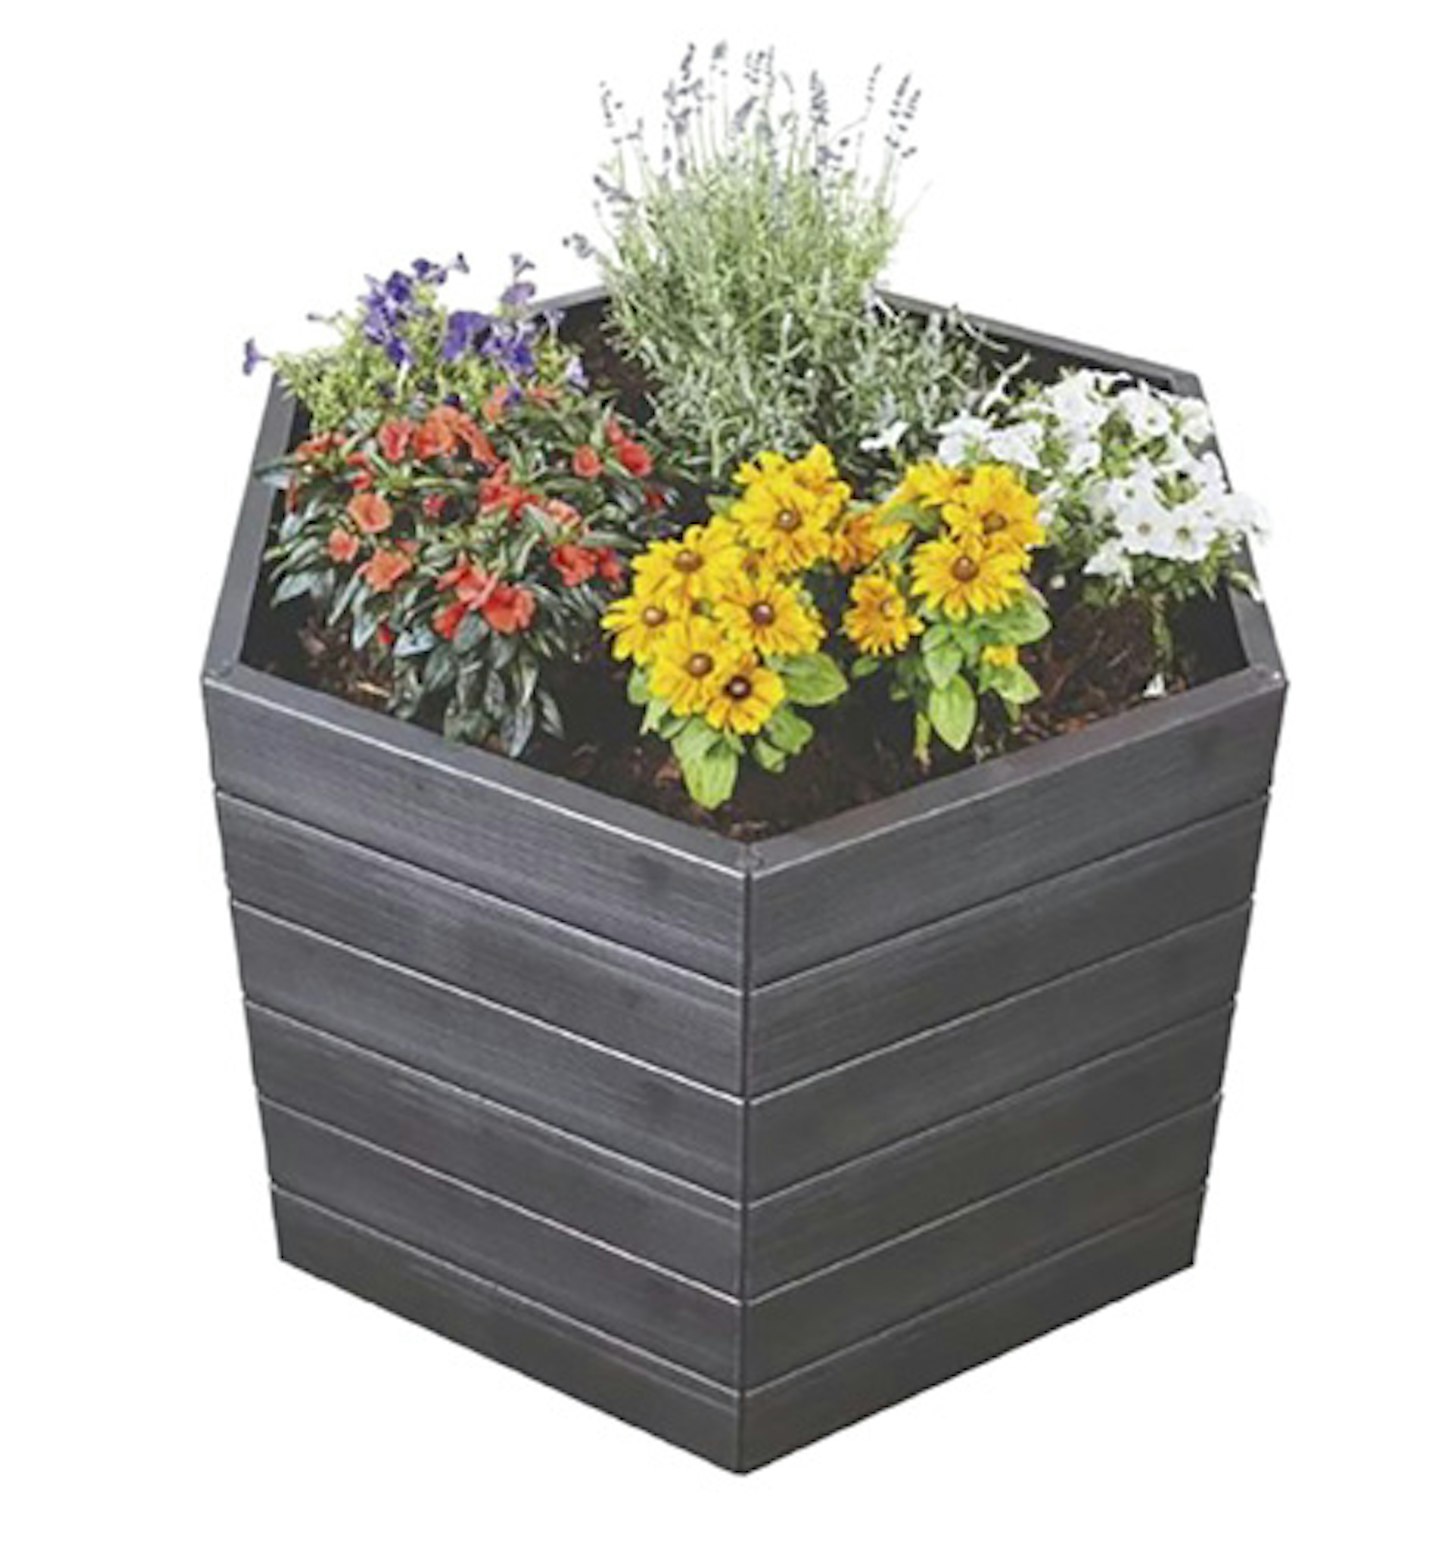 hexagonal raised bed with colourful flowers